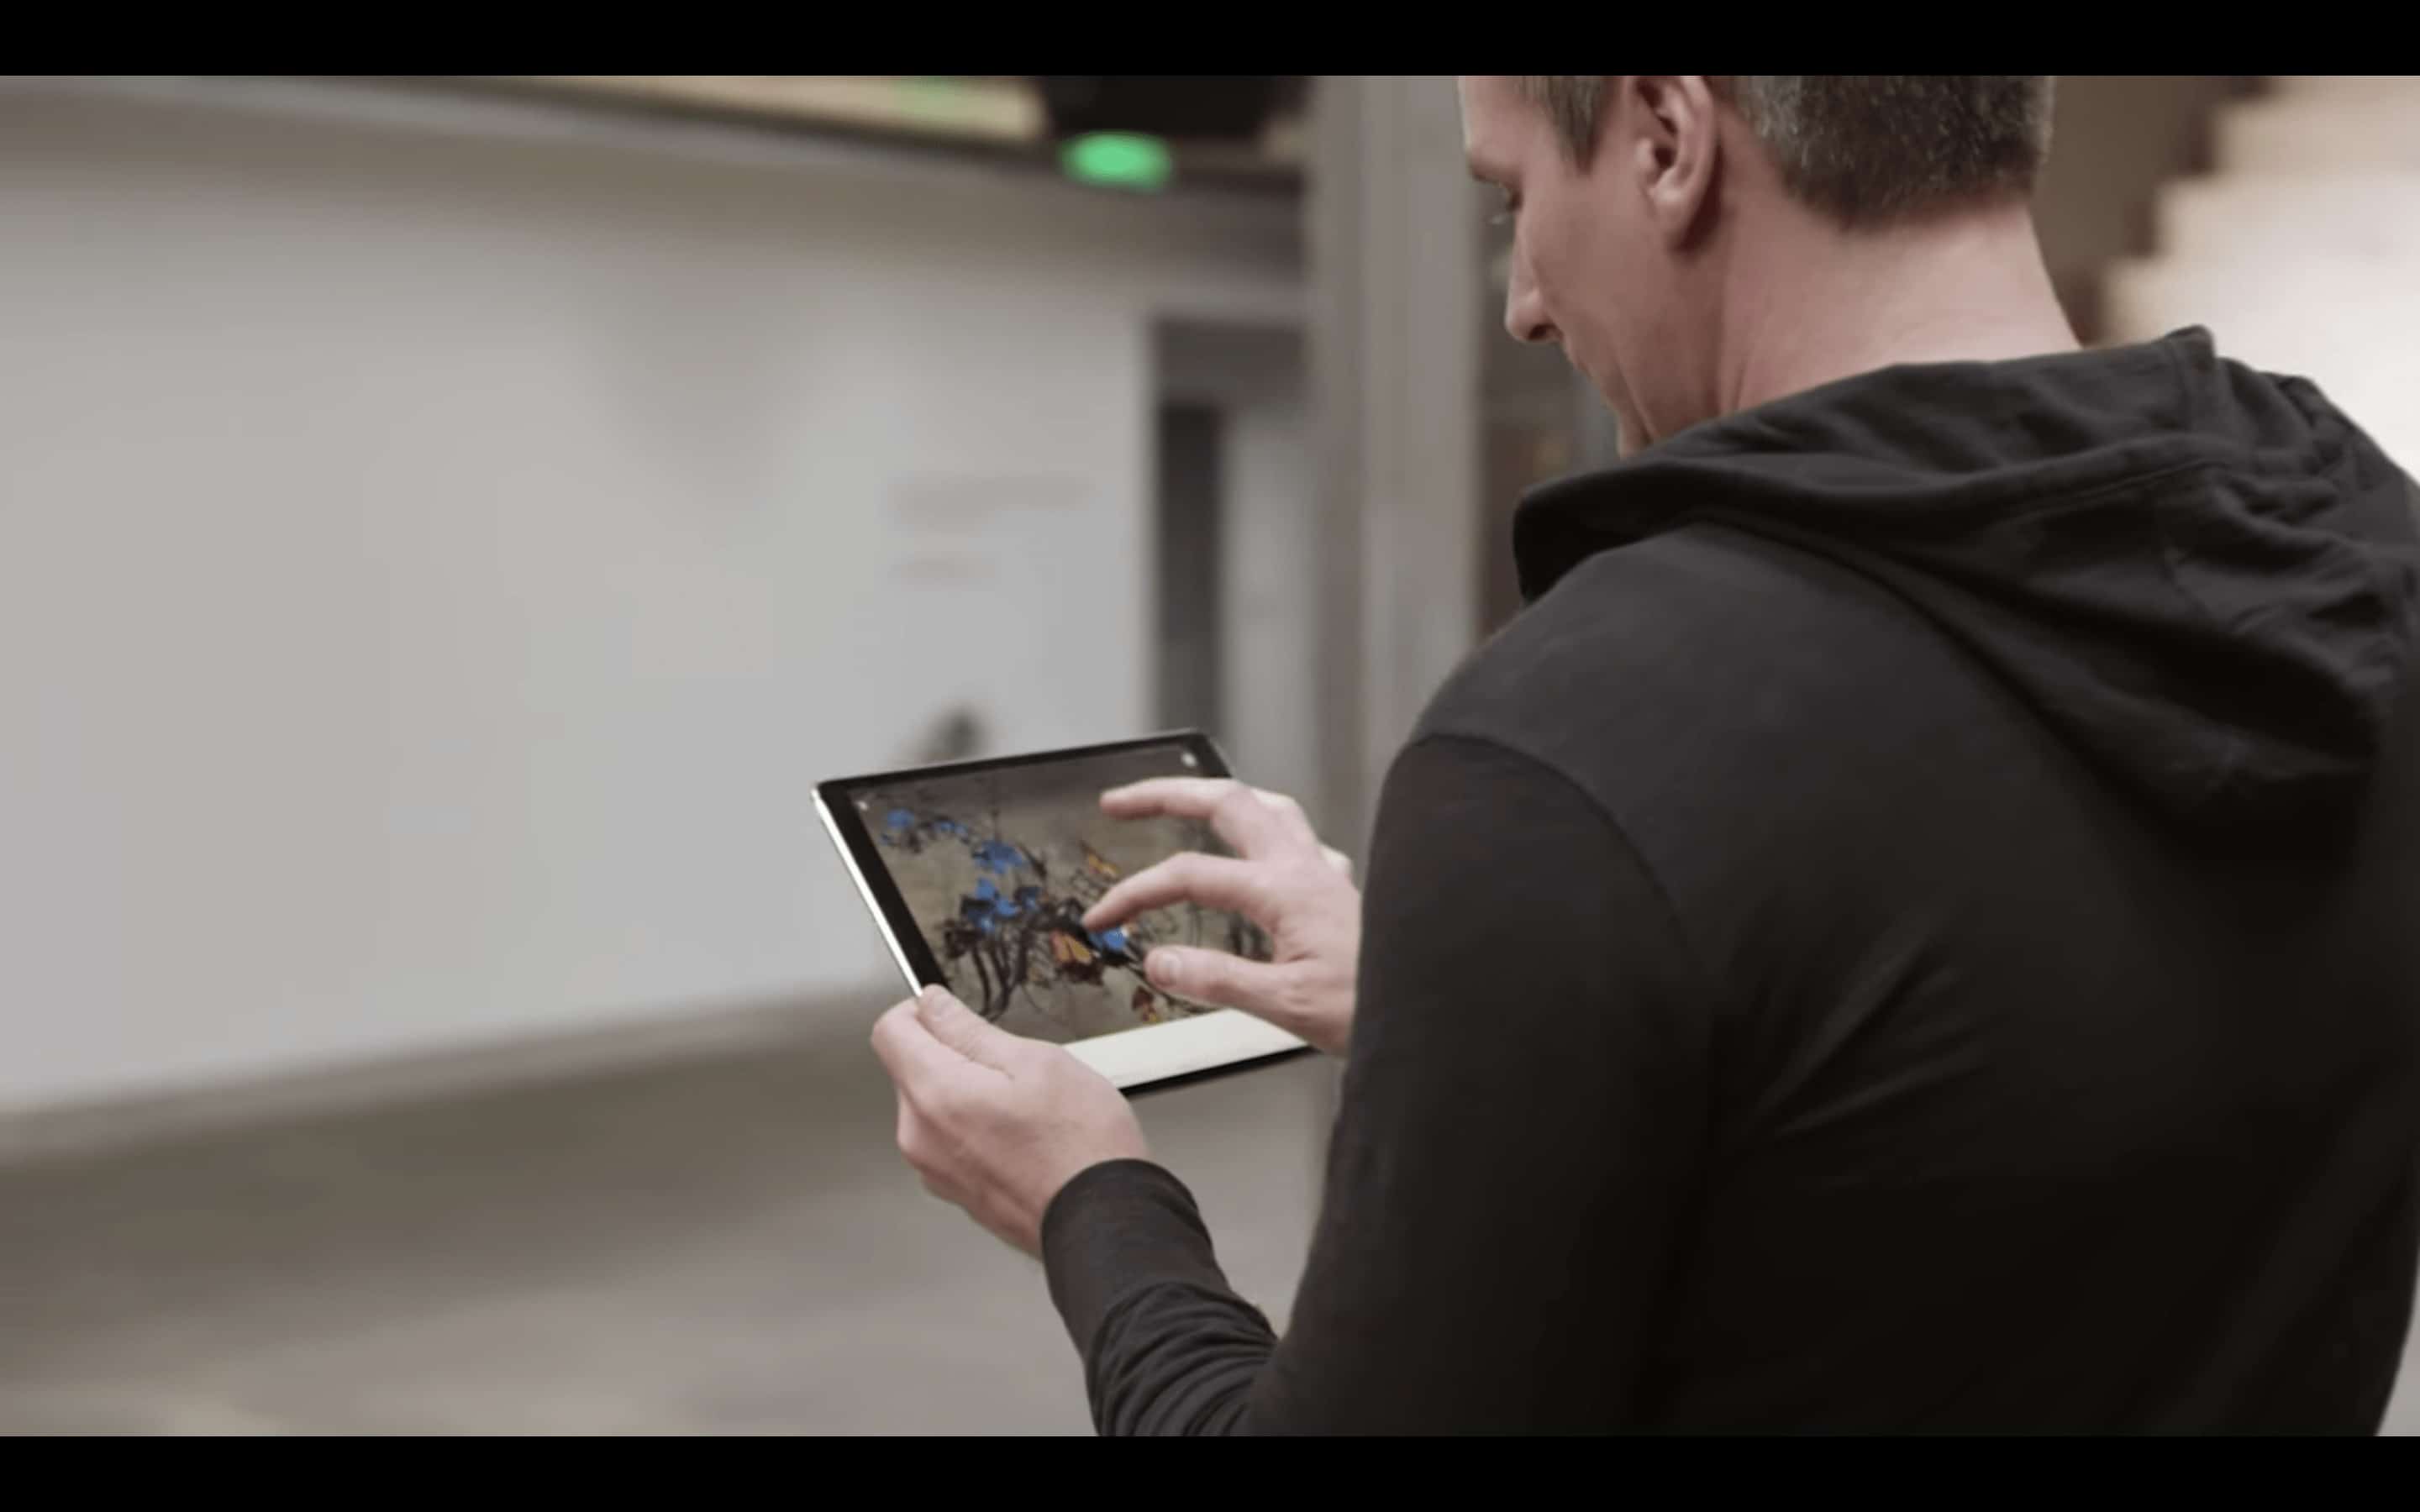 Adobe announced their new authoring tool for AR, called Project Aero.